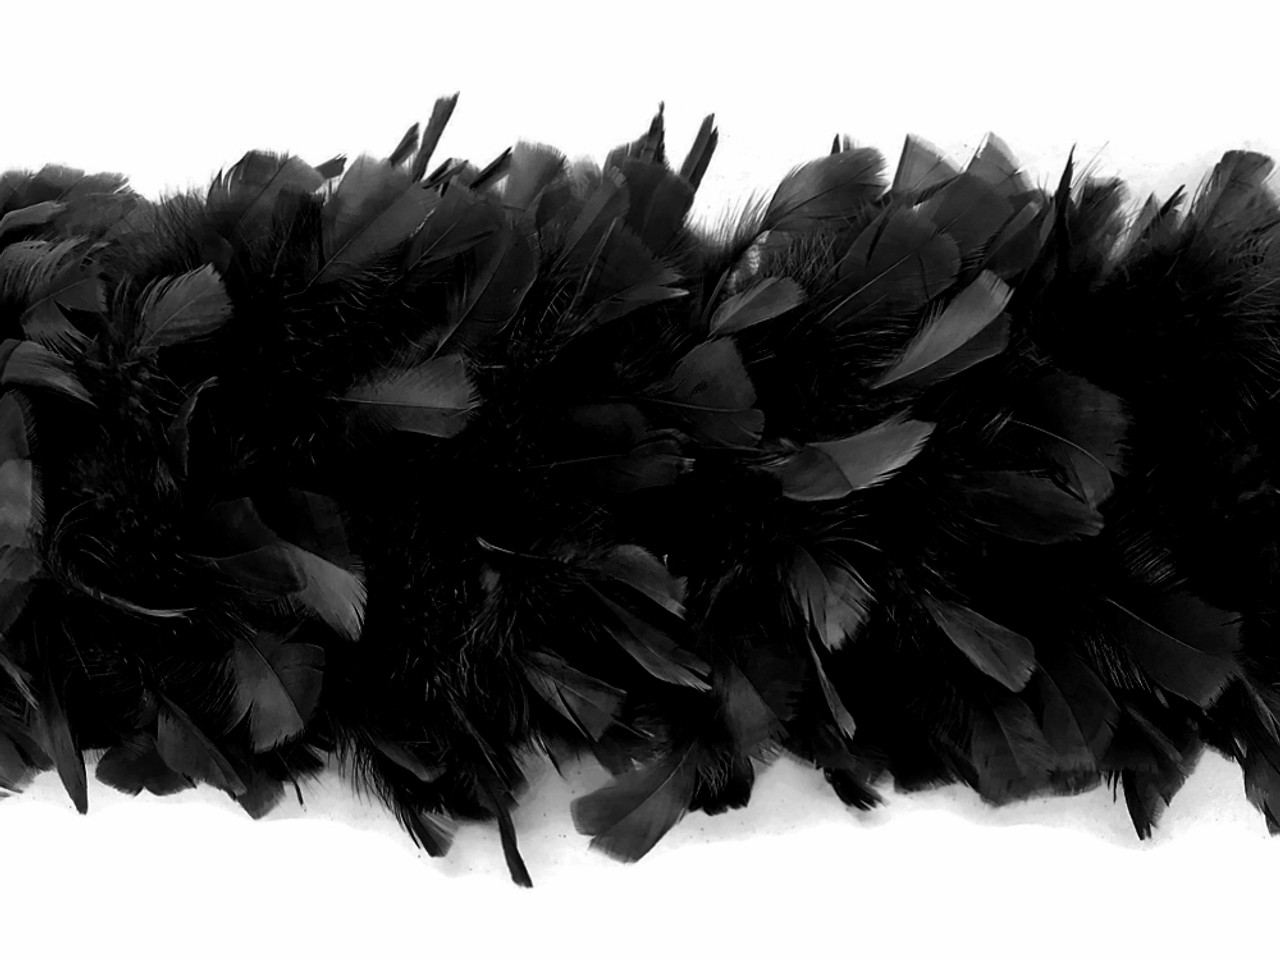 20 ply Luxury Ostrich Feather Boa